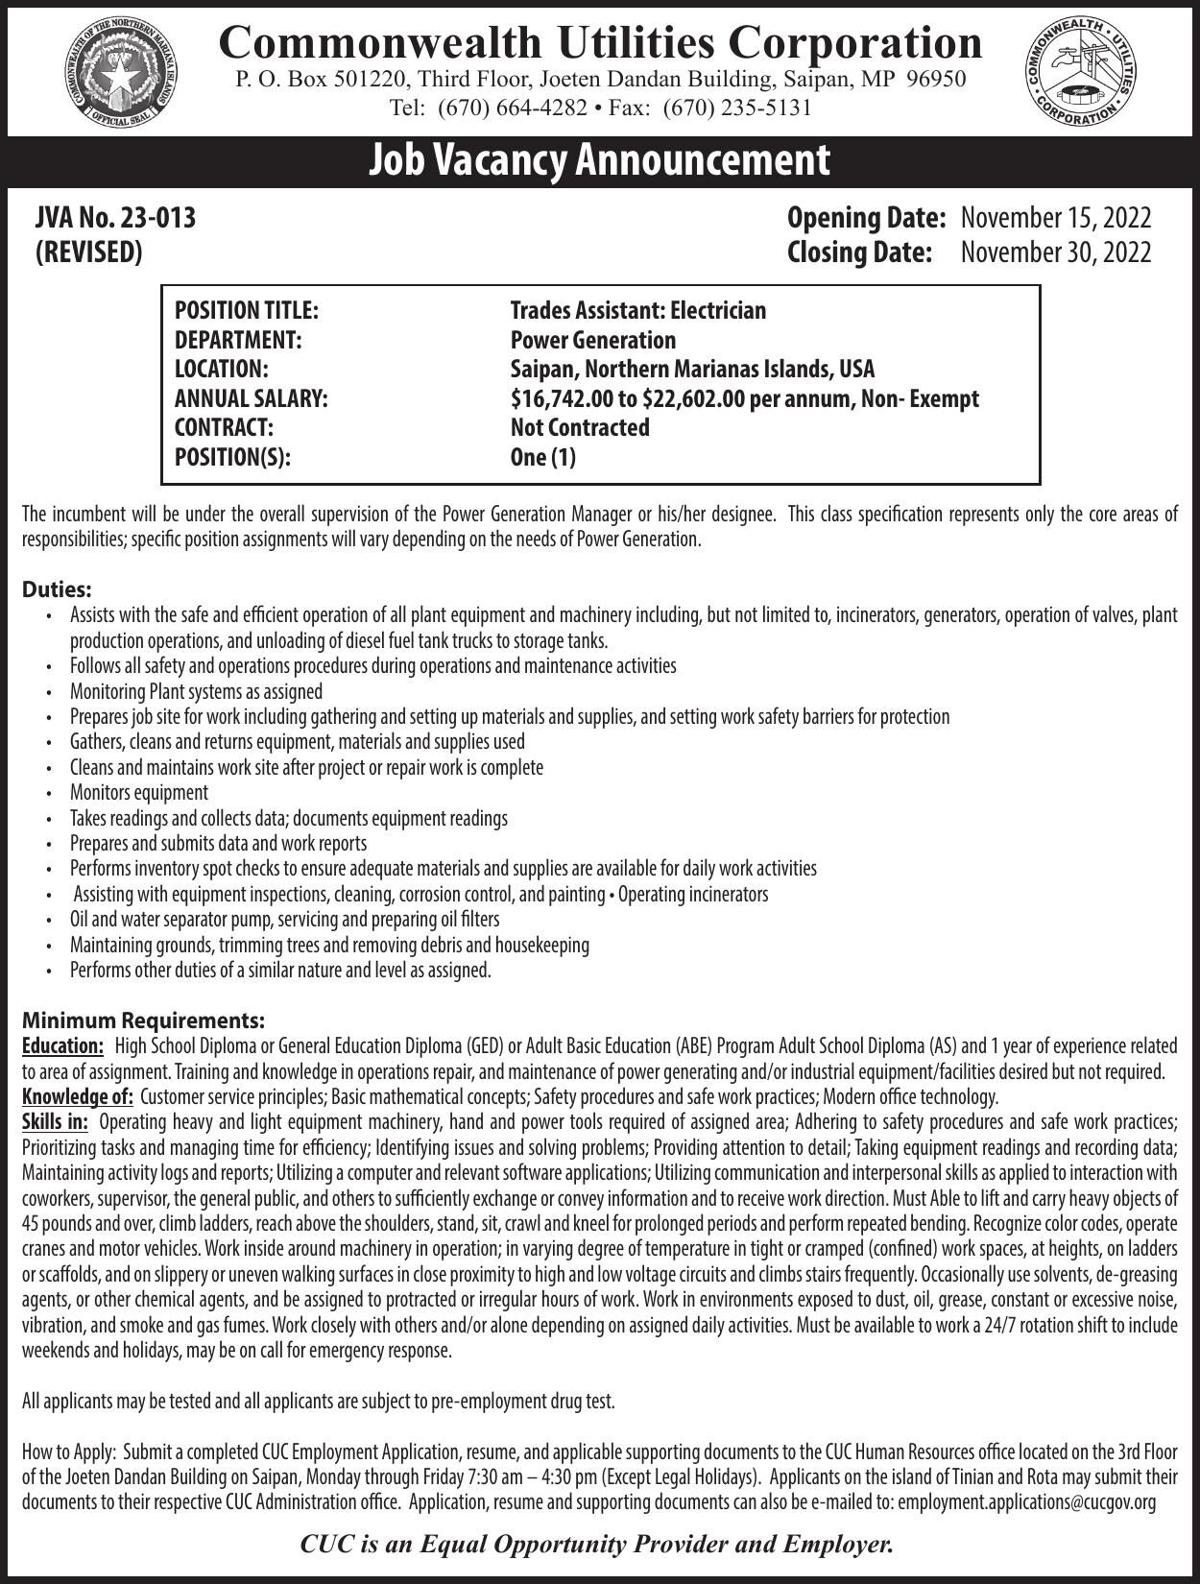 CUC JVA 23-013 TRADES ASSISTANT-ELECTRICIAN, Power Generation REVISED 11.16.22